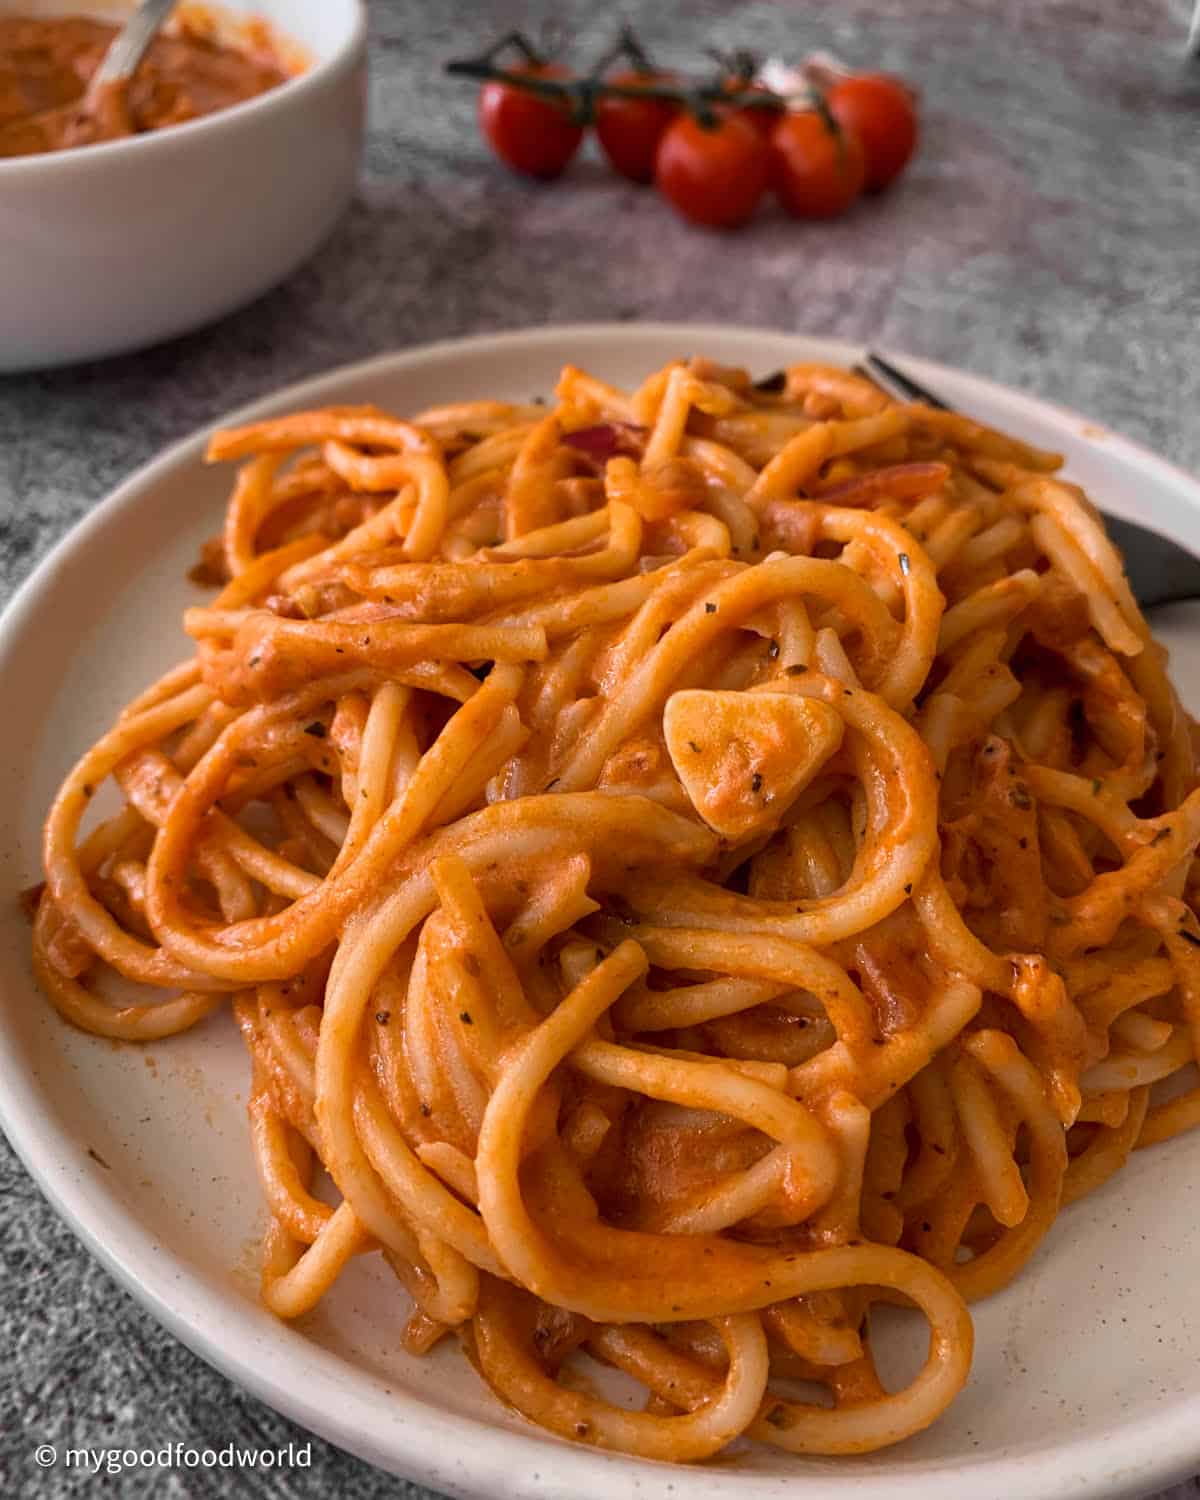 Some spaghetti coated with a creamy red sauce is placed in a heap on a white round plate. A slice of garlic is placed on the pasta. Some cherry tomatoes on the vine and a bowl of the sauce are also seen in the picture.